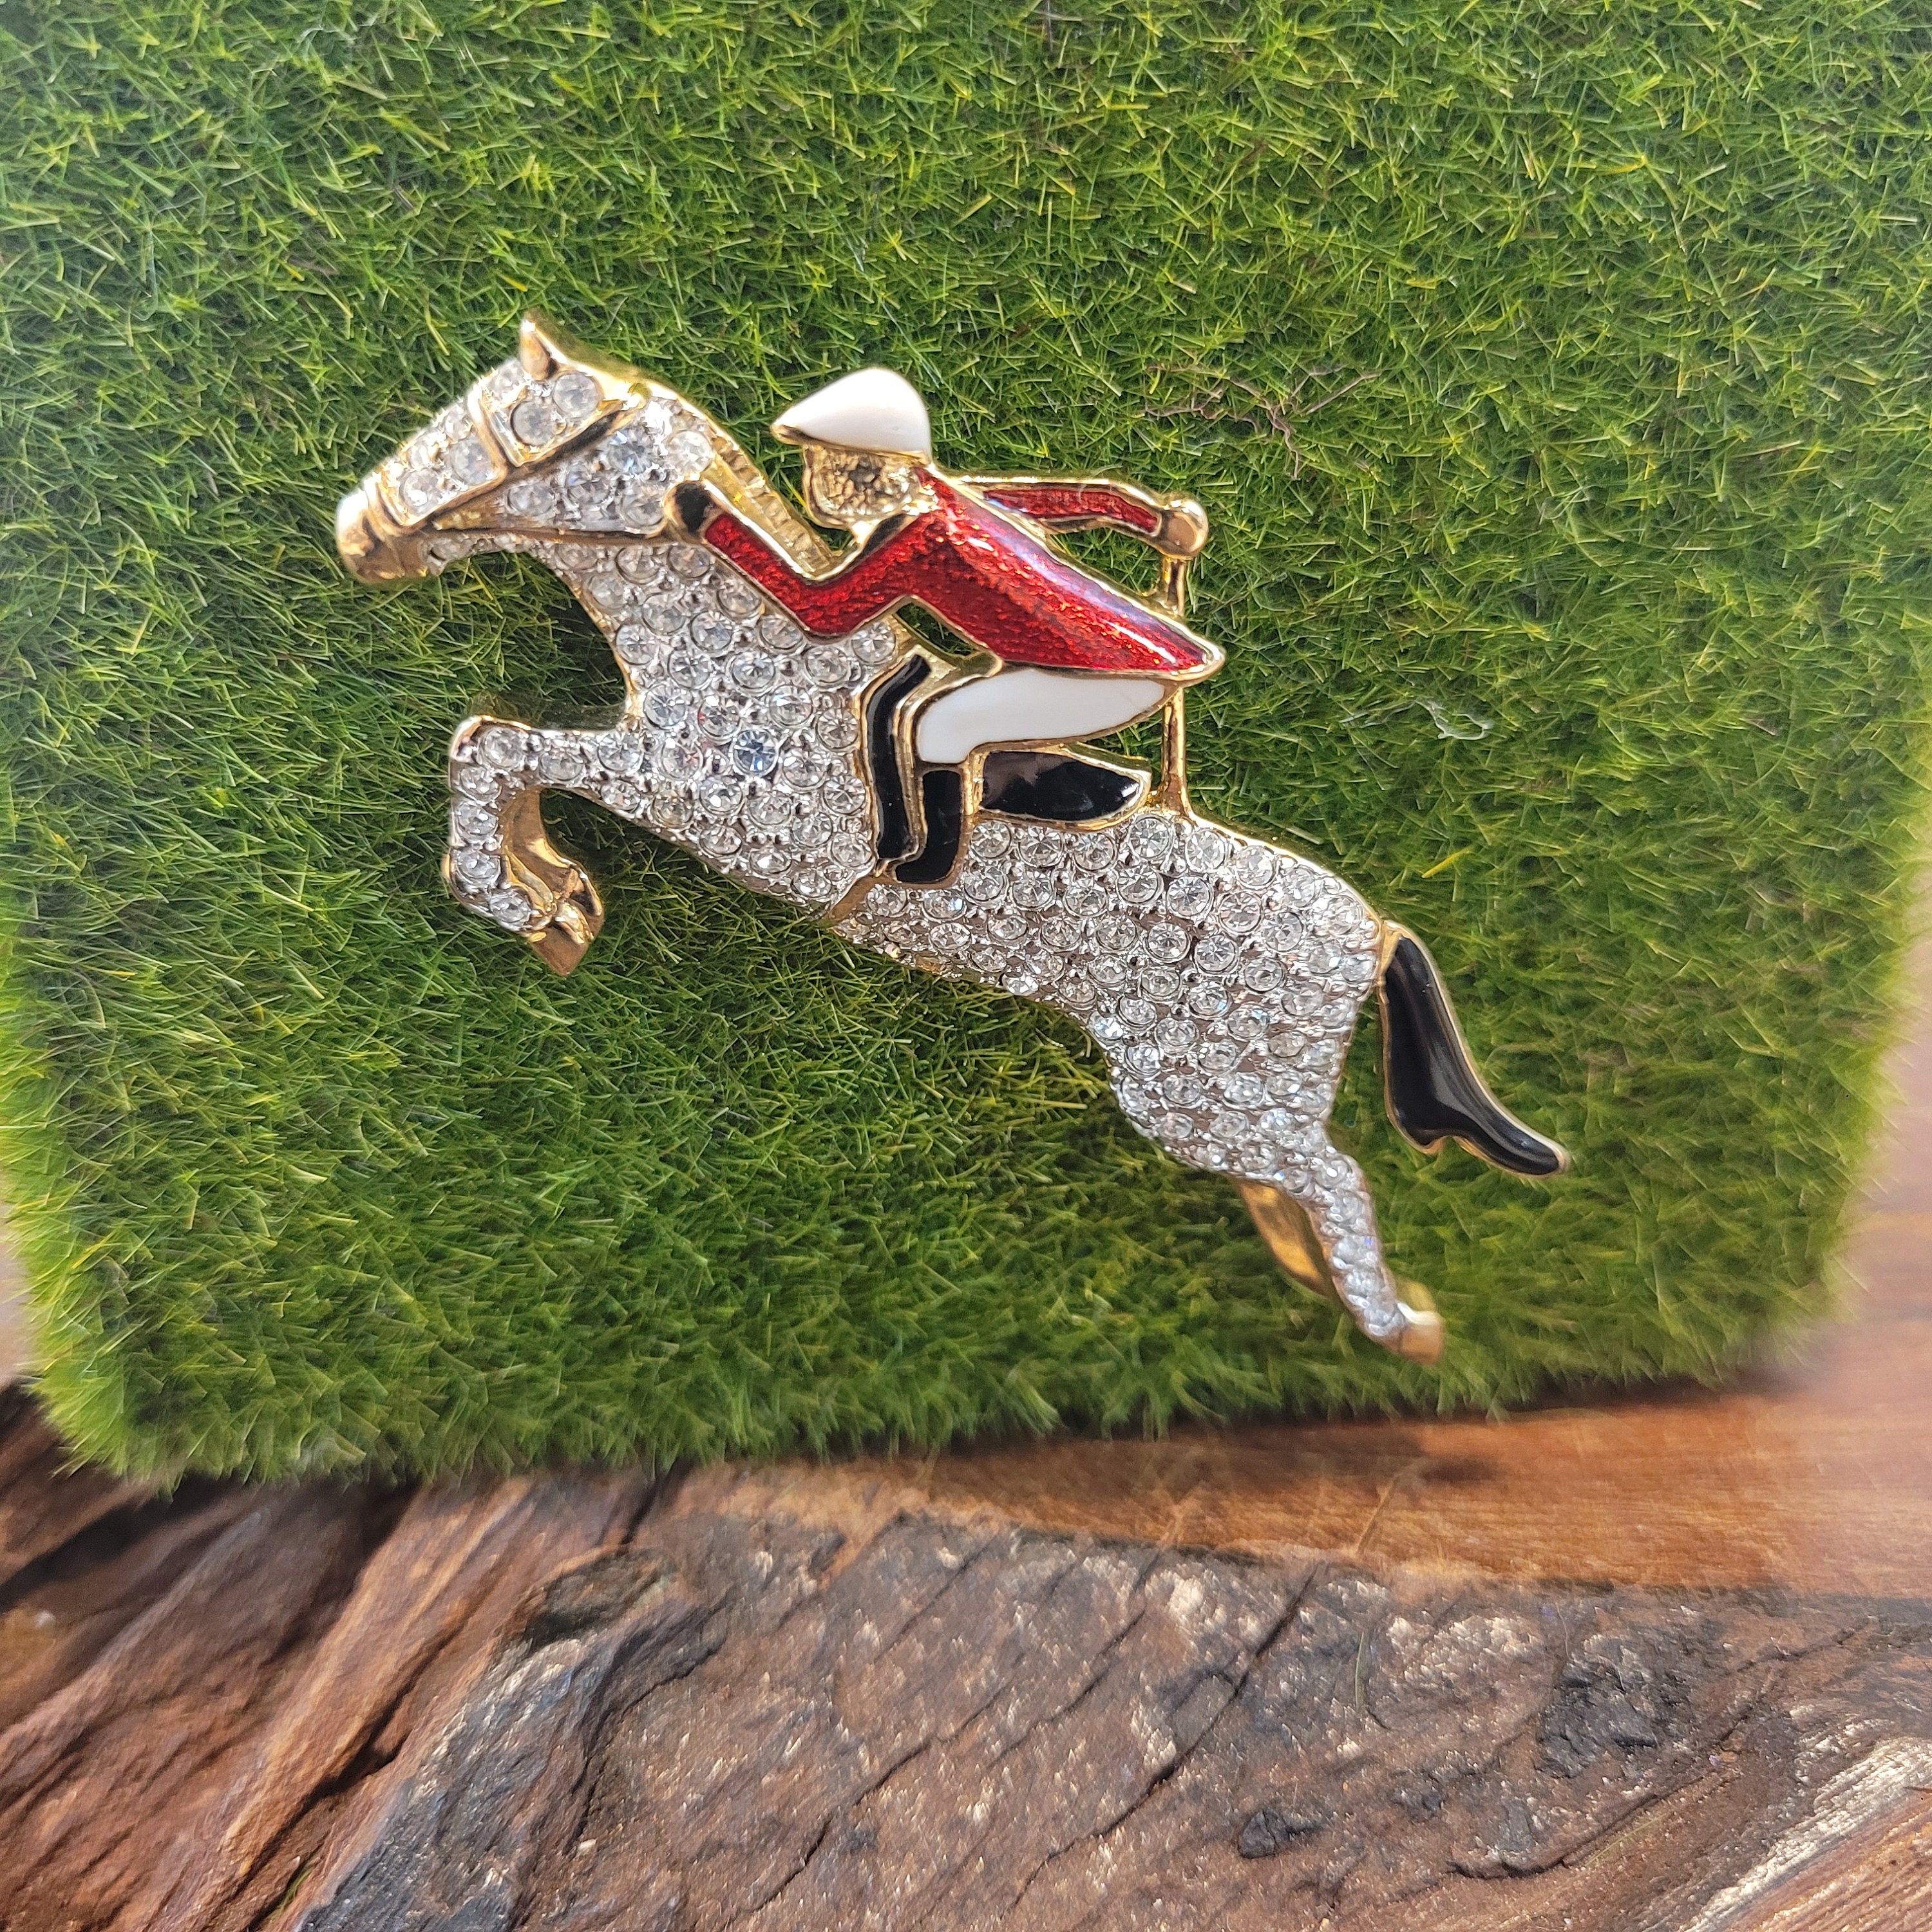 Lot - COLLECTION OF EQUESTRIAN THEME STICK PINS